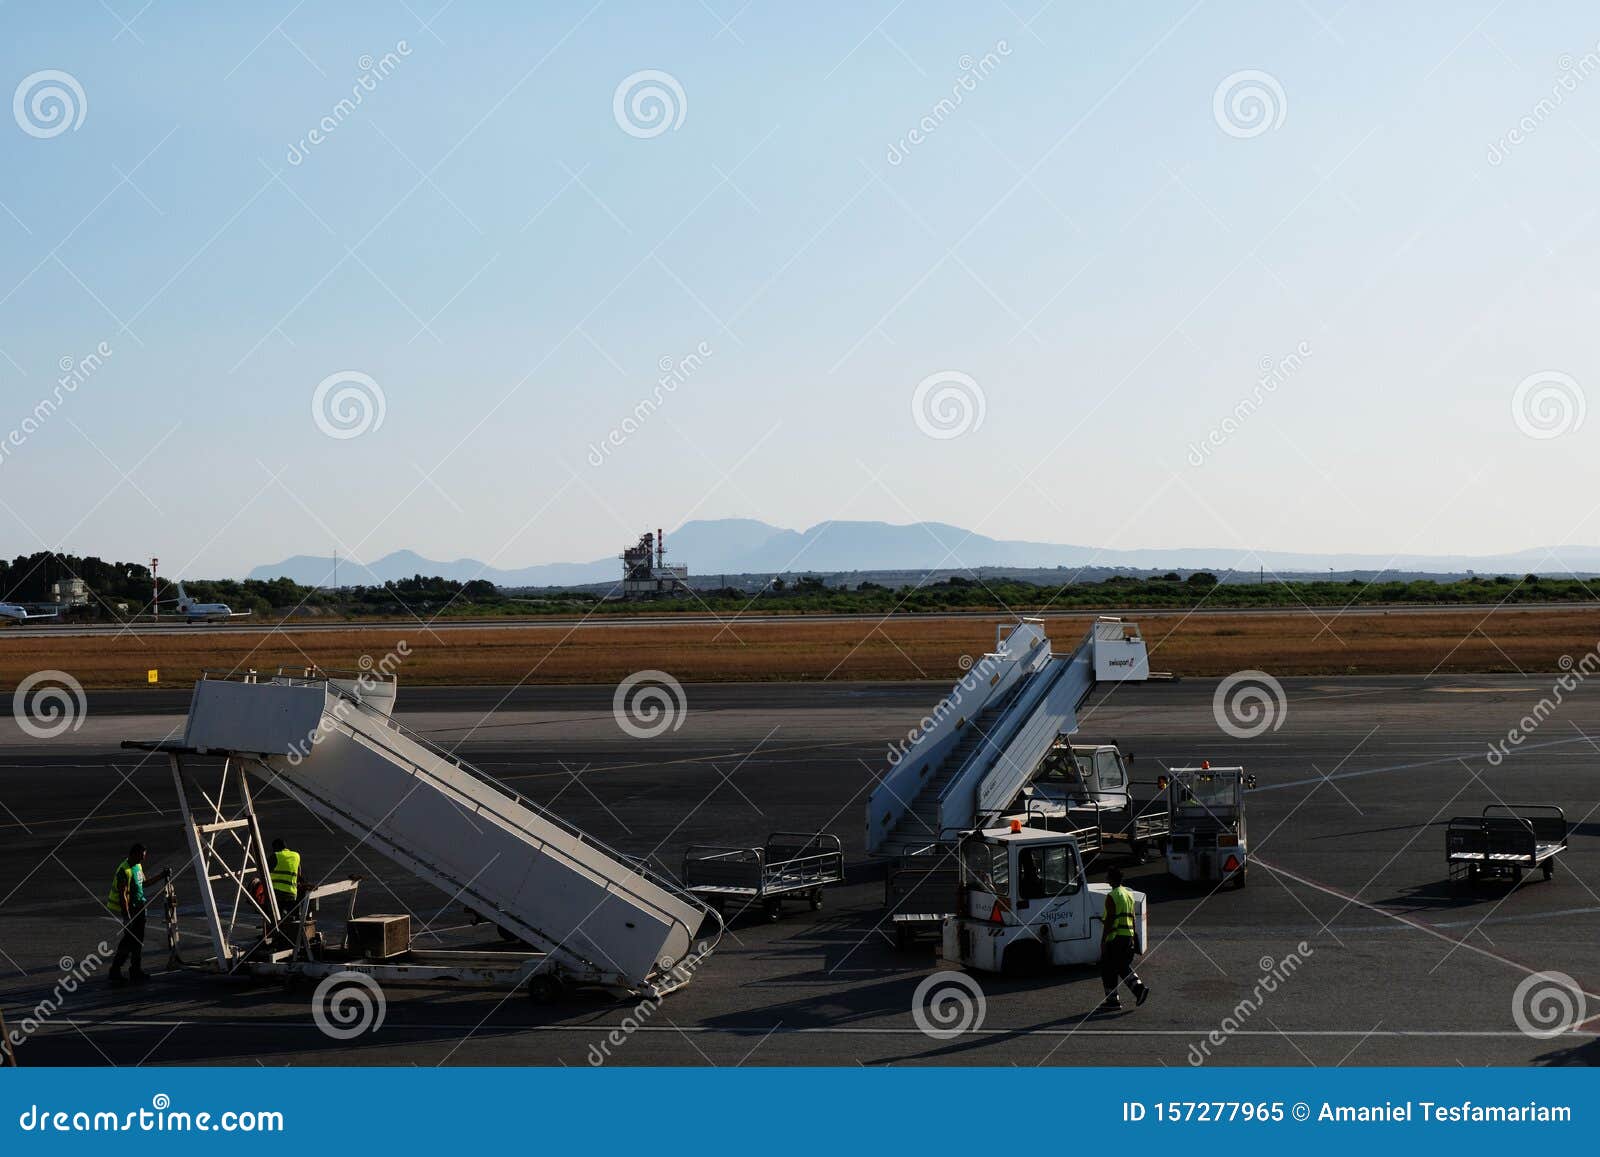 Movable Boarding Ramps At The Airport Editorial Image - Image Of Board,  Jetliner: 157277965